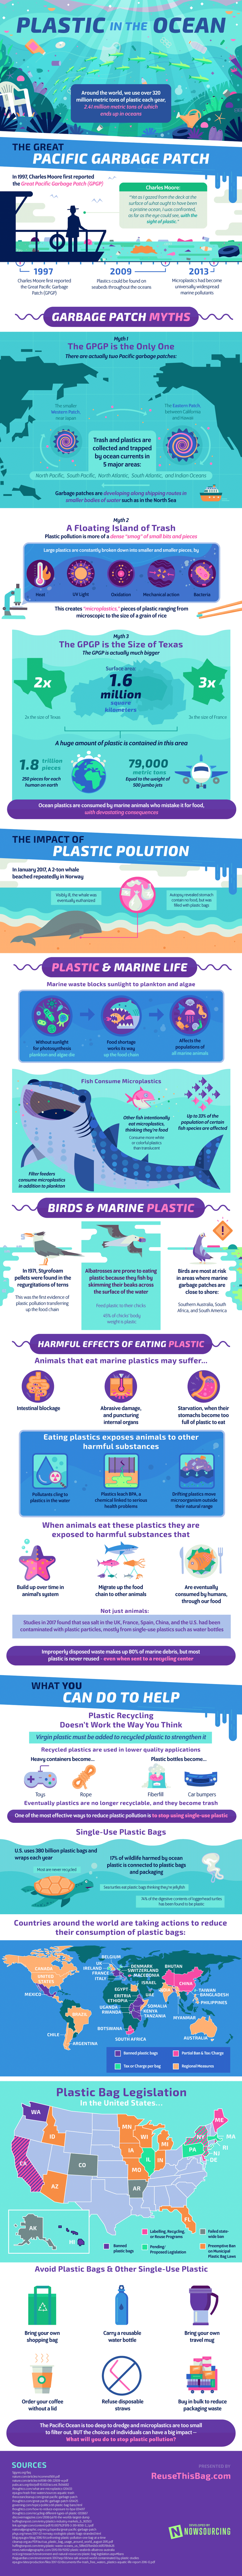 Plastics Waste in Our Oceans #infographic